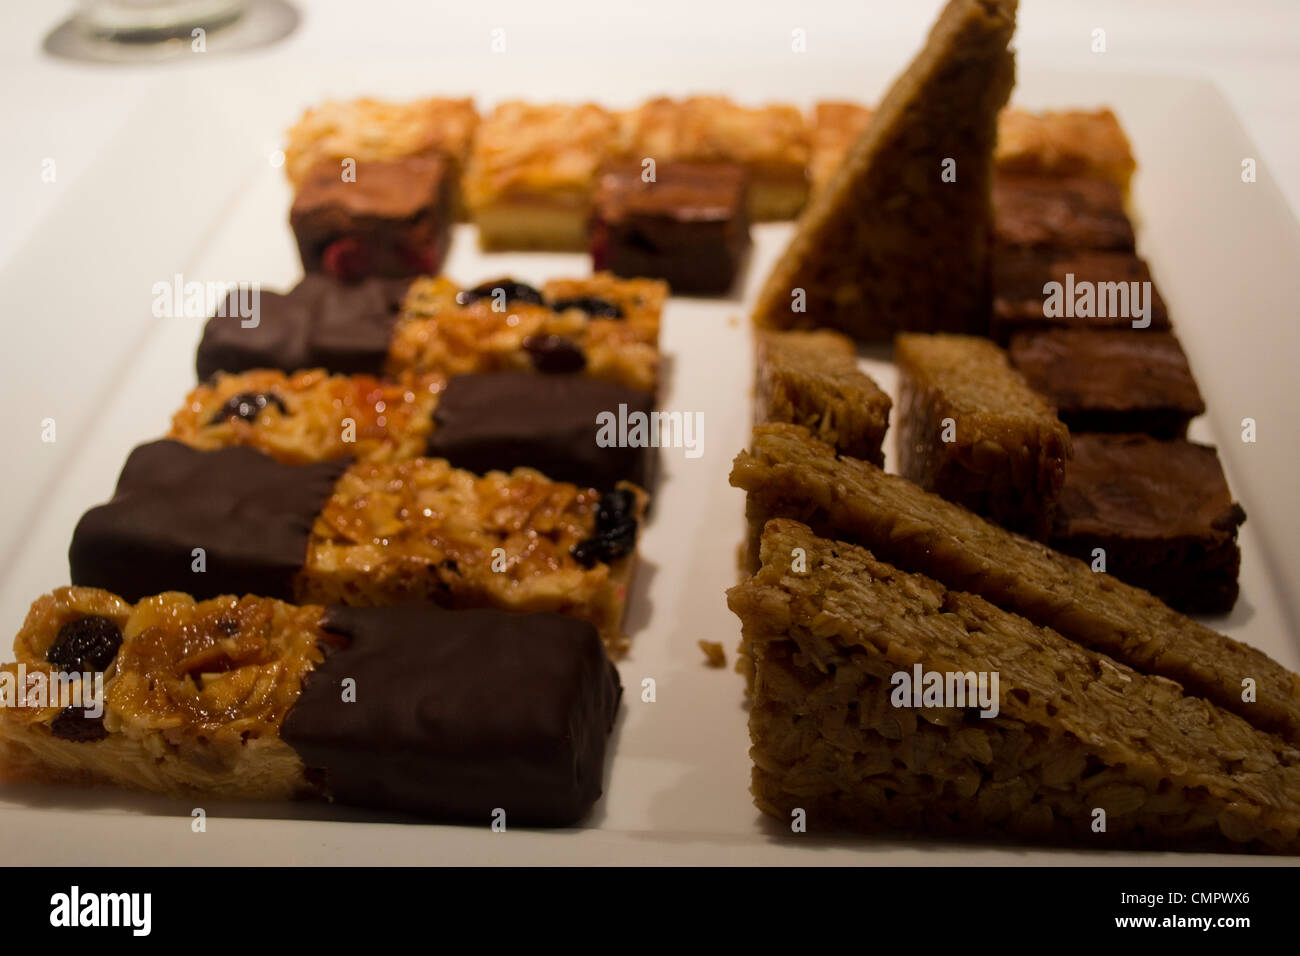 A plate of home-made flapjacks and other treats. Stock Photo